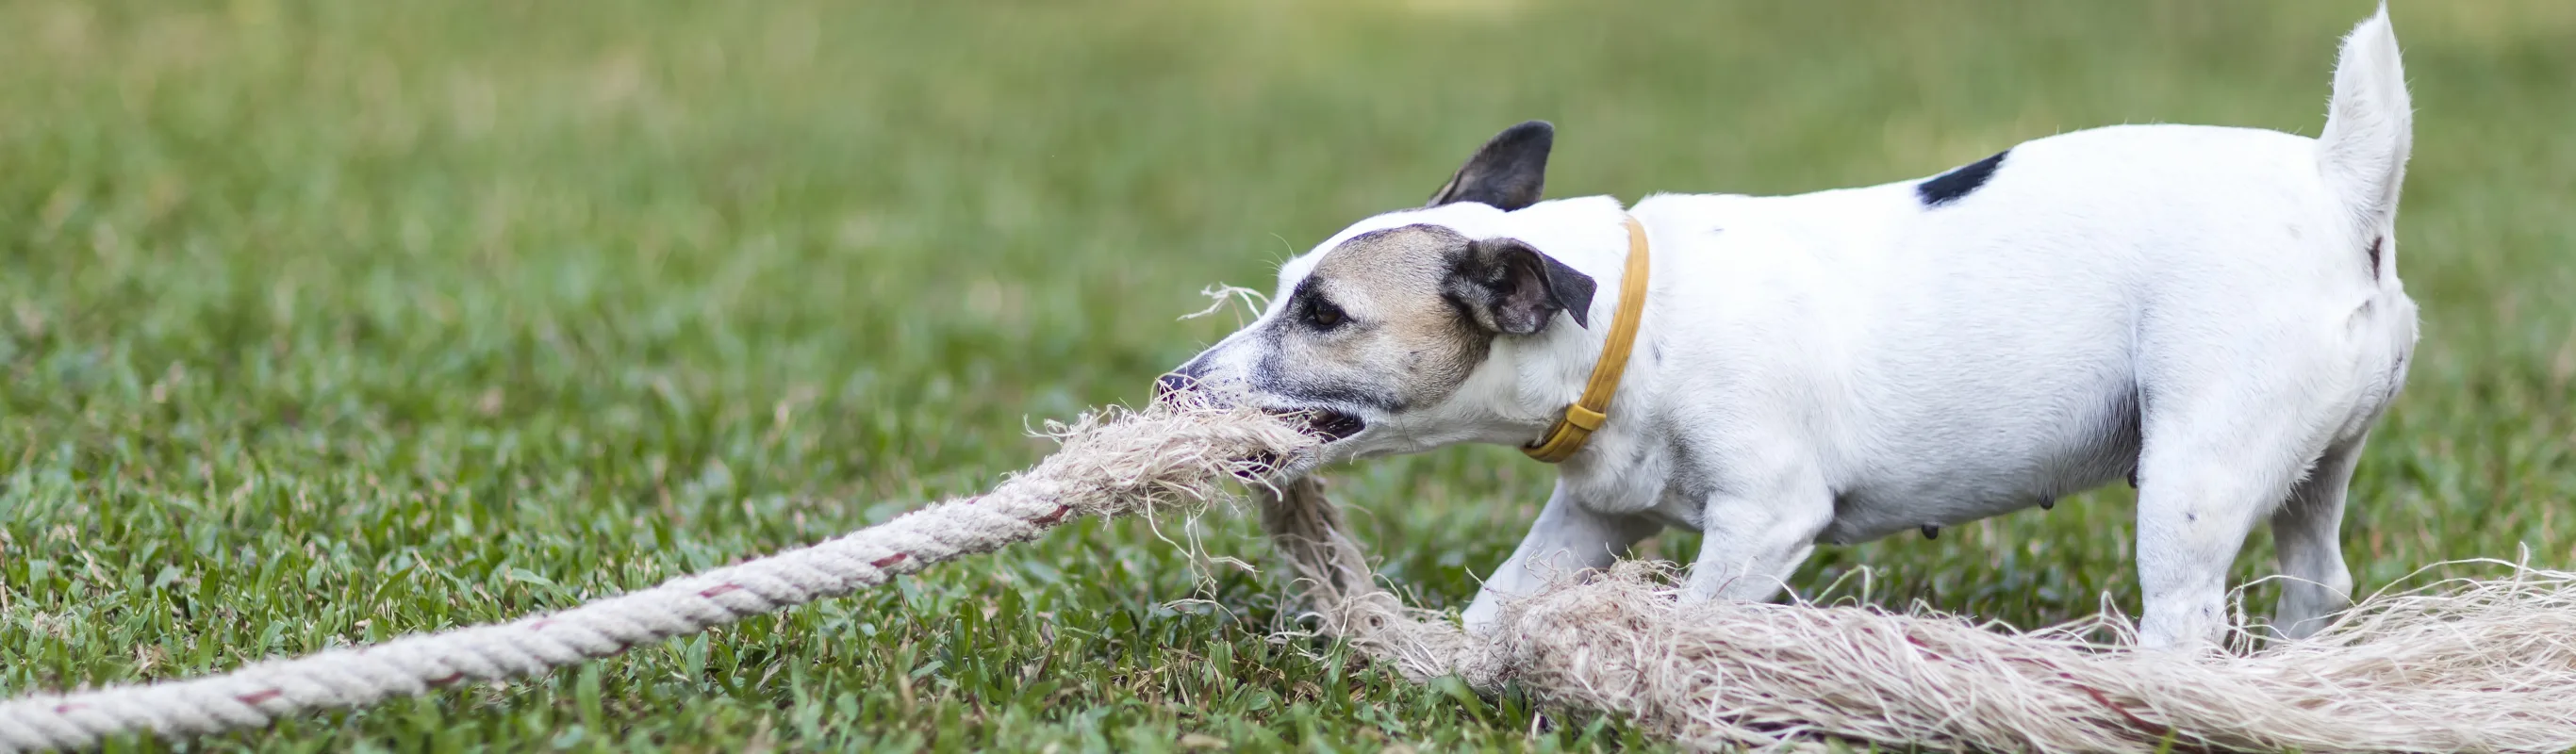 Dog playing with rope